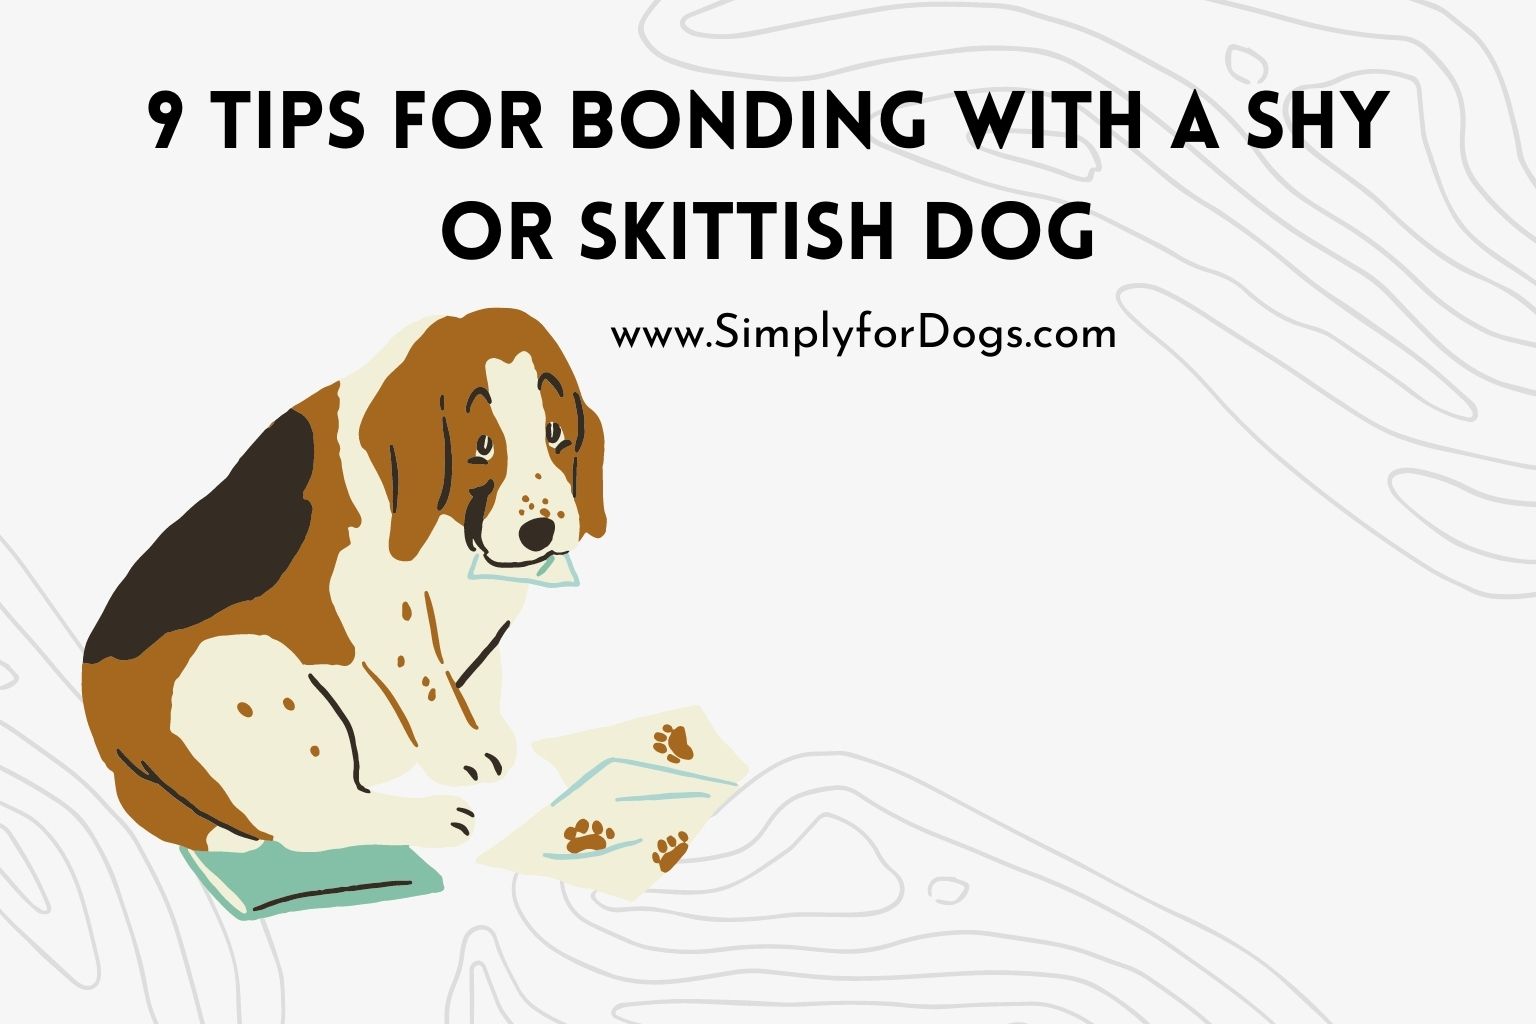 9 Tips for Bonding With a Shy or Skittish Dog